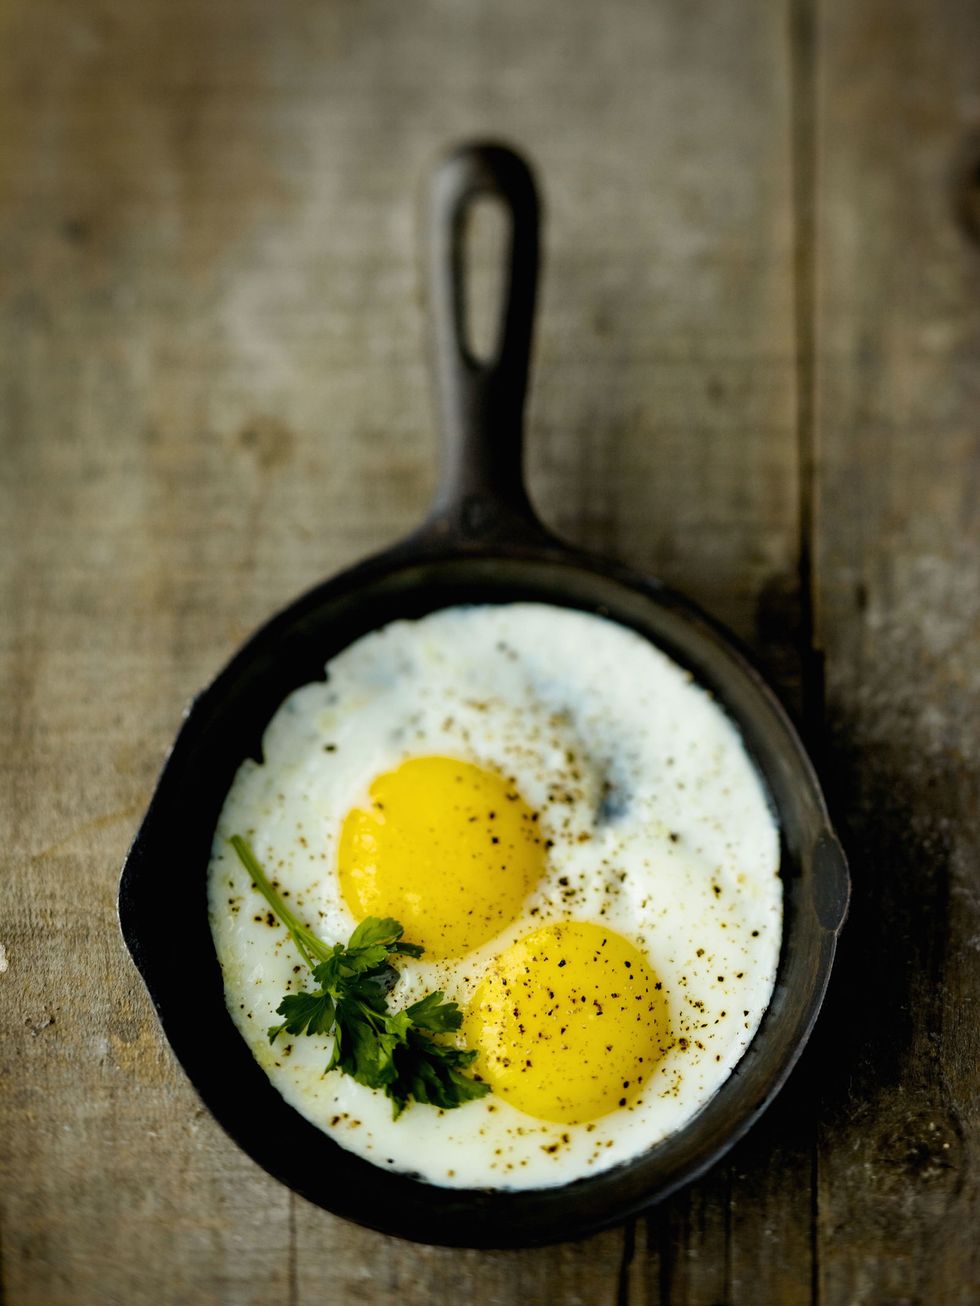 <p>Whether your scramble, poach, or hard-boil them, eggs are the ultimate morning meal. &ldquo;Since eggs are considered the gold standard in providing high-quality protein, eating them can enhance calorie burning,&rdquo; says Newgent. One <a href="http://www.ncbi.nlm.nih.gov/pmc/articles/PMC2755181/">study</a> found that an egg breakfast encouraged 65-percent greater weight loss in overweight and obese people following a reduced-calorie diet plan. &ldquo;Eating breakfast, especially one rich in protein, can be useful for improving satiety and significantly raise your resting metabolism&mdash;perhaps by as much as 10 percent&mdash;for the entire day,&rdquo; adds Newgent.&nbsp;</p>